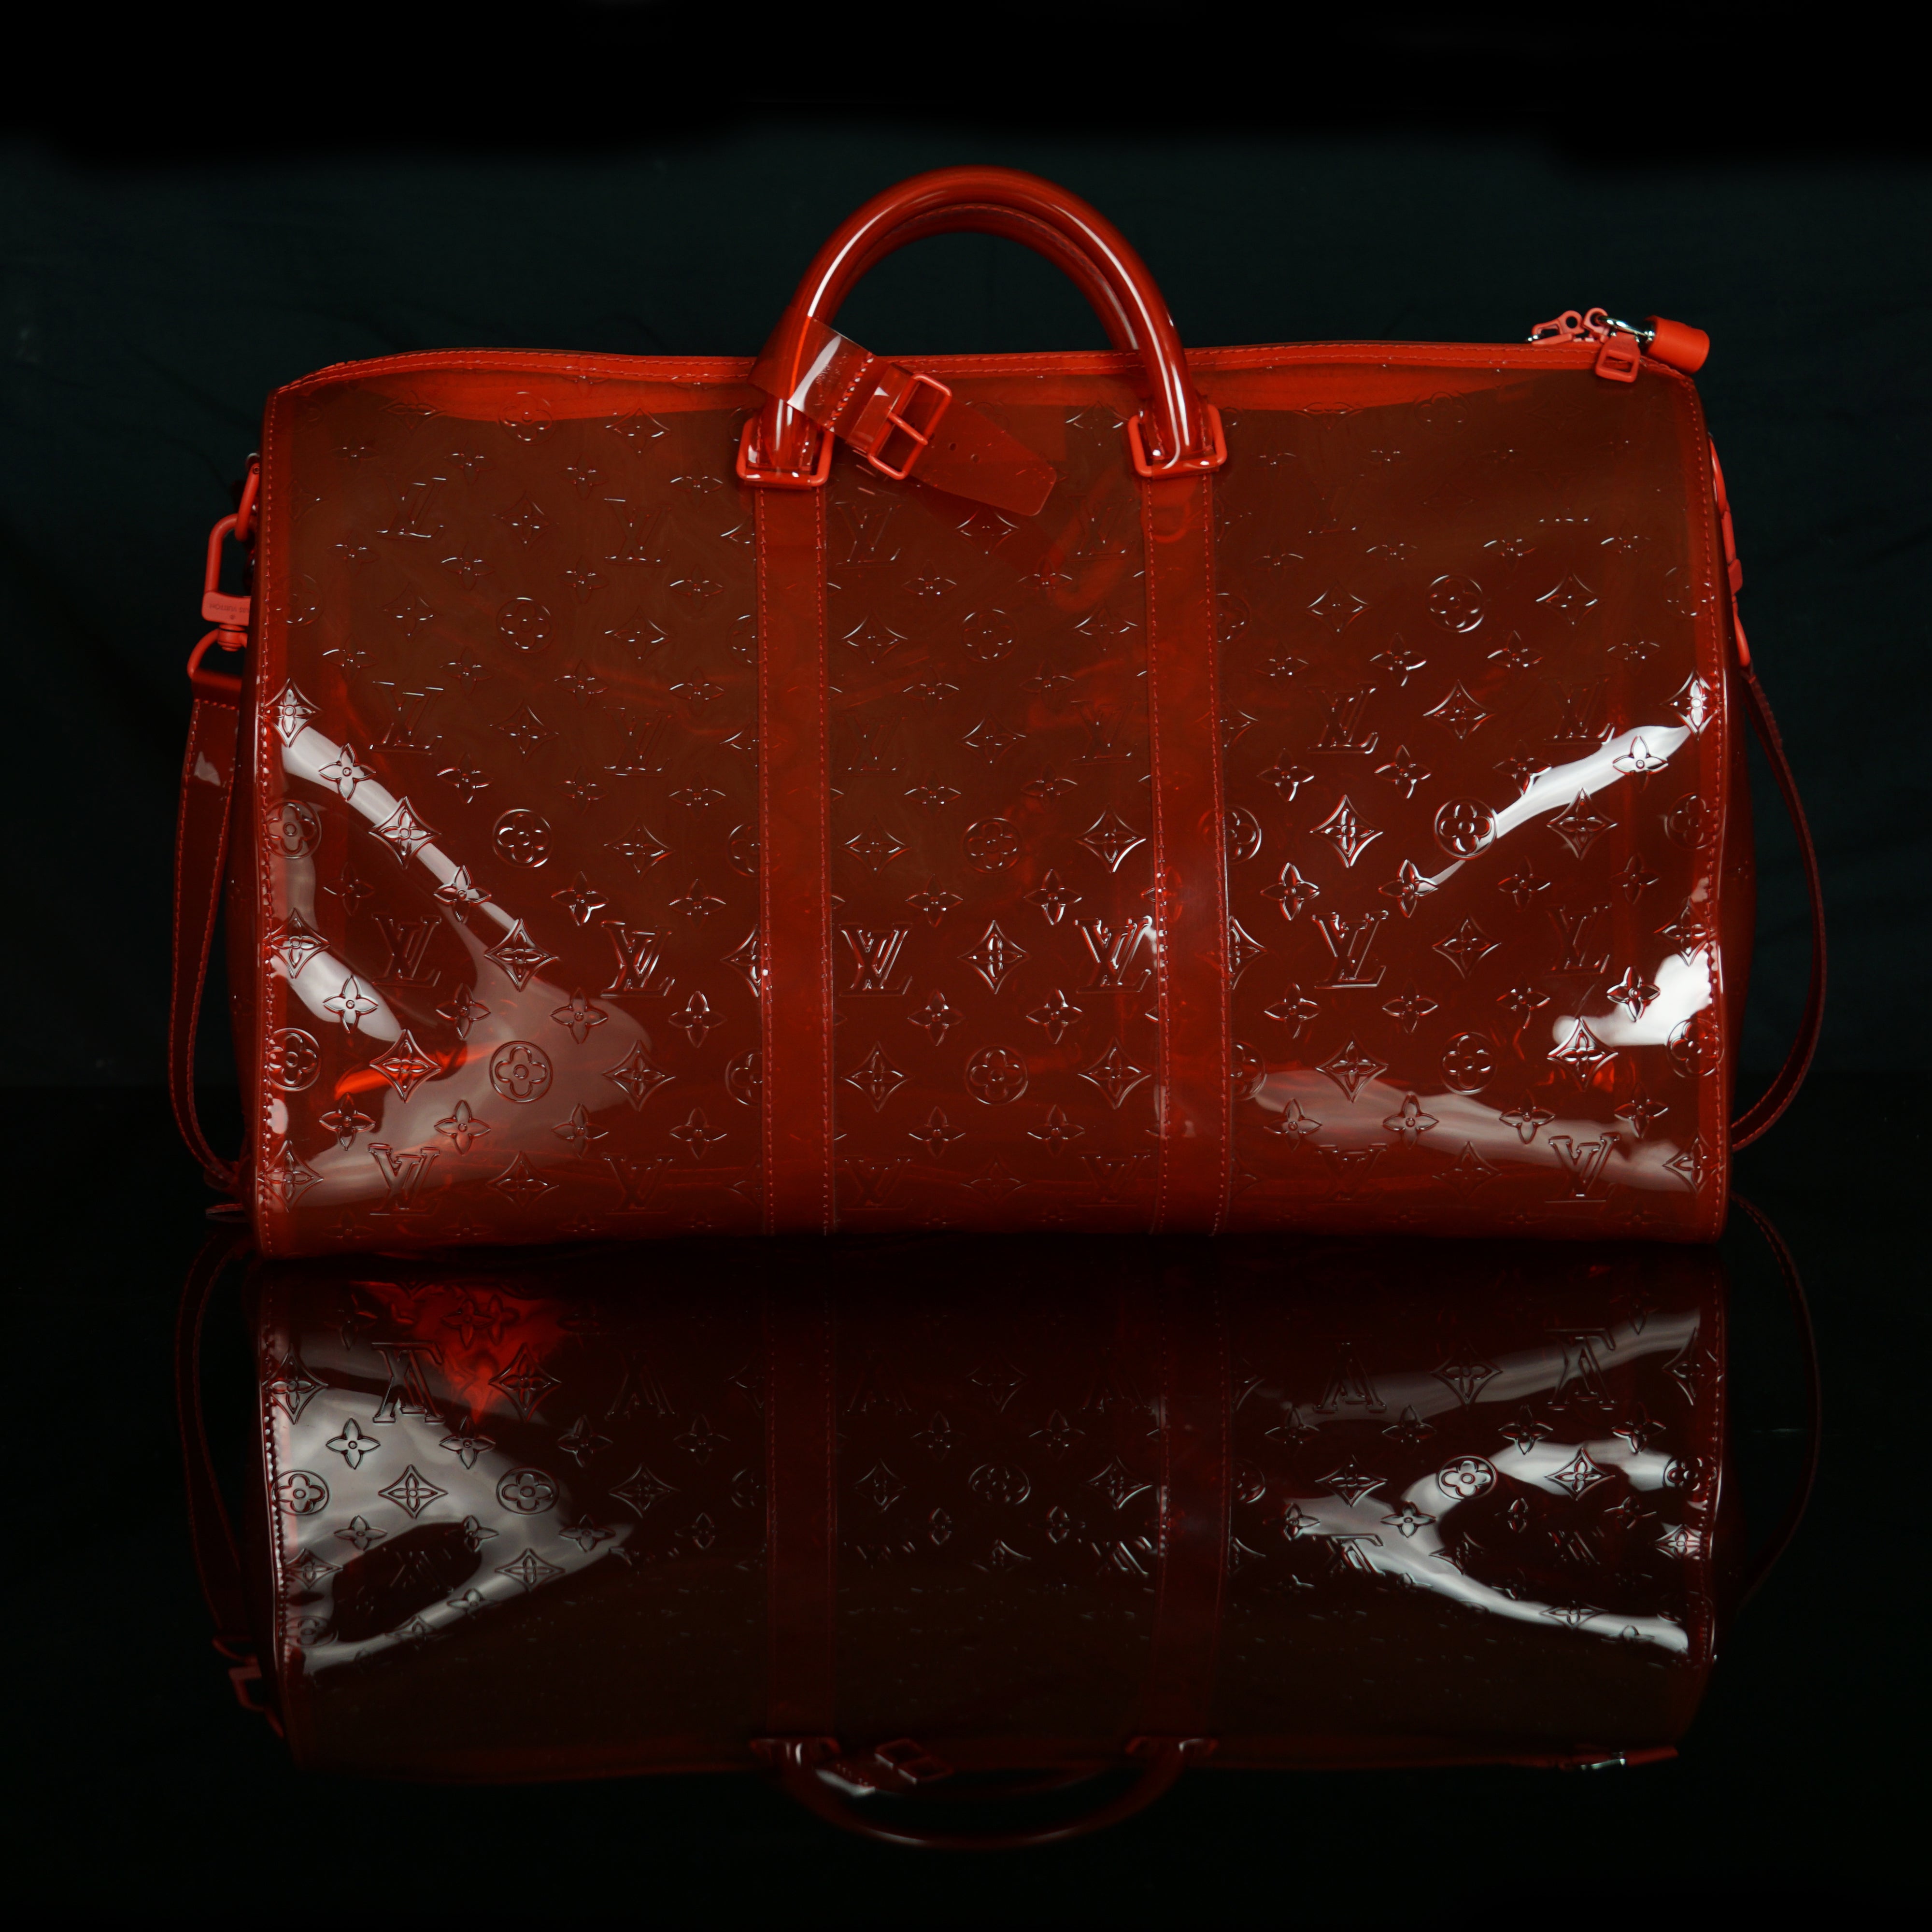 Louis Vuitton-Keepall-19.69 x 11.42 x 9.06 inches ( length x height x width ) L 50 x H 22 x W 29 cm/L 19.7 x H 8.7 x W 11.4 inches Red Transparent embossed Monogram PVC PVC trim Silver-colour and tone-on-tone detailing Top handle for hand or elbow carry L